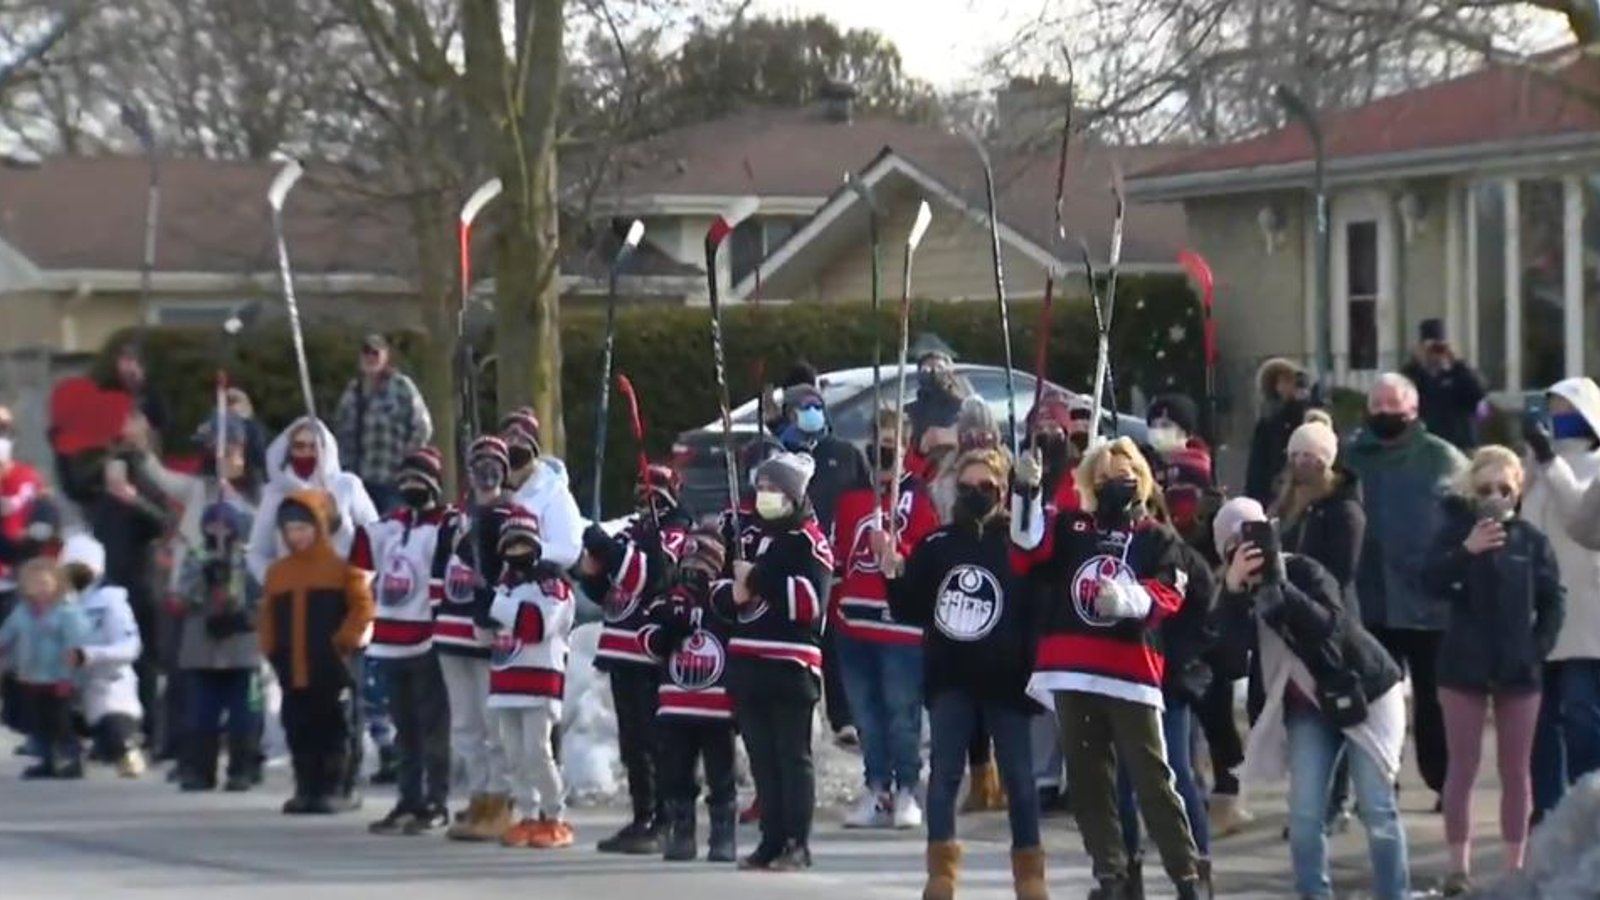 Canadian hockey fans give Walter Gretzky an amazing tribute.